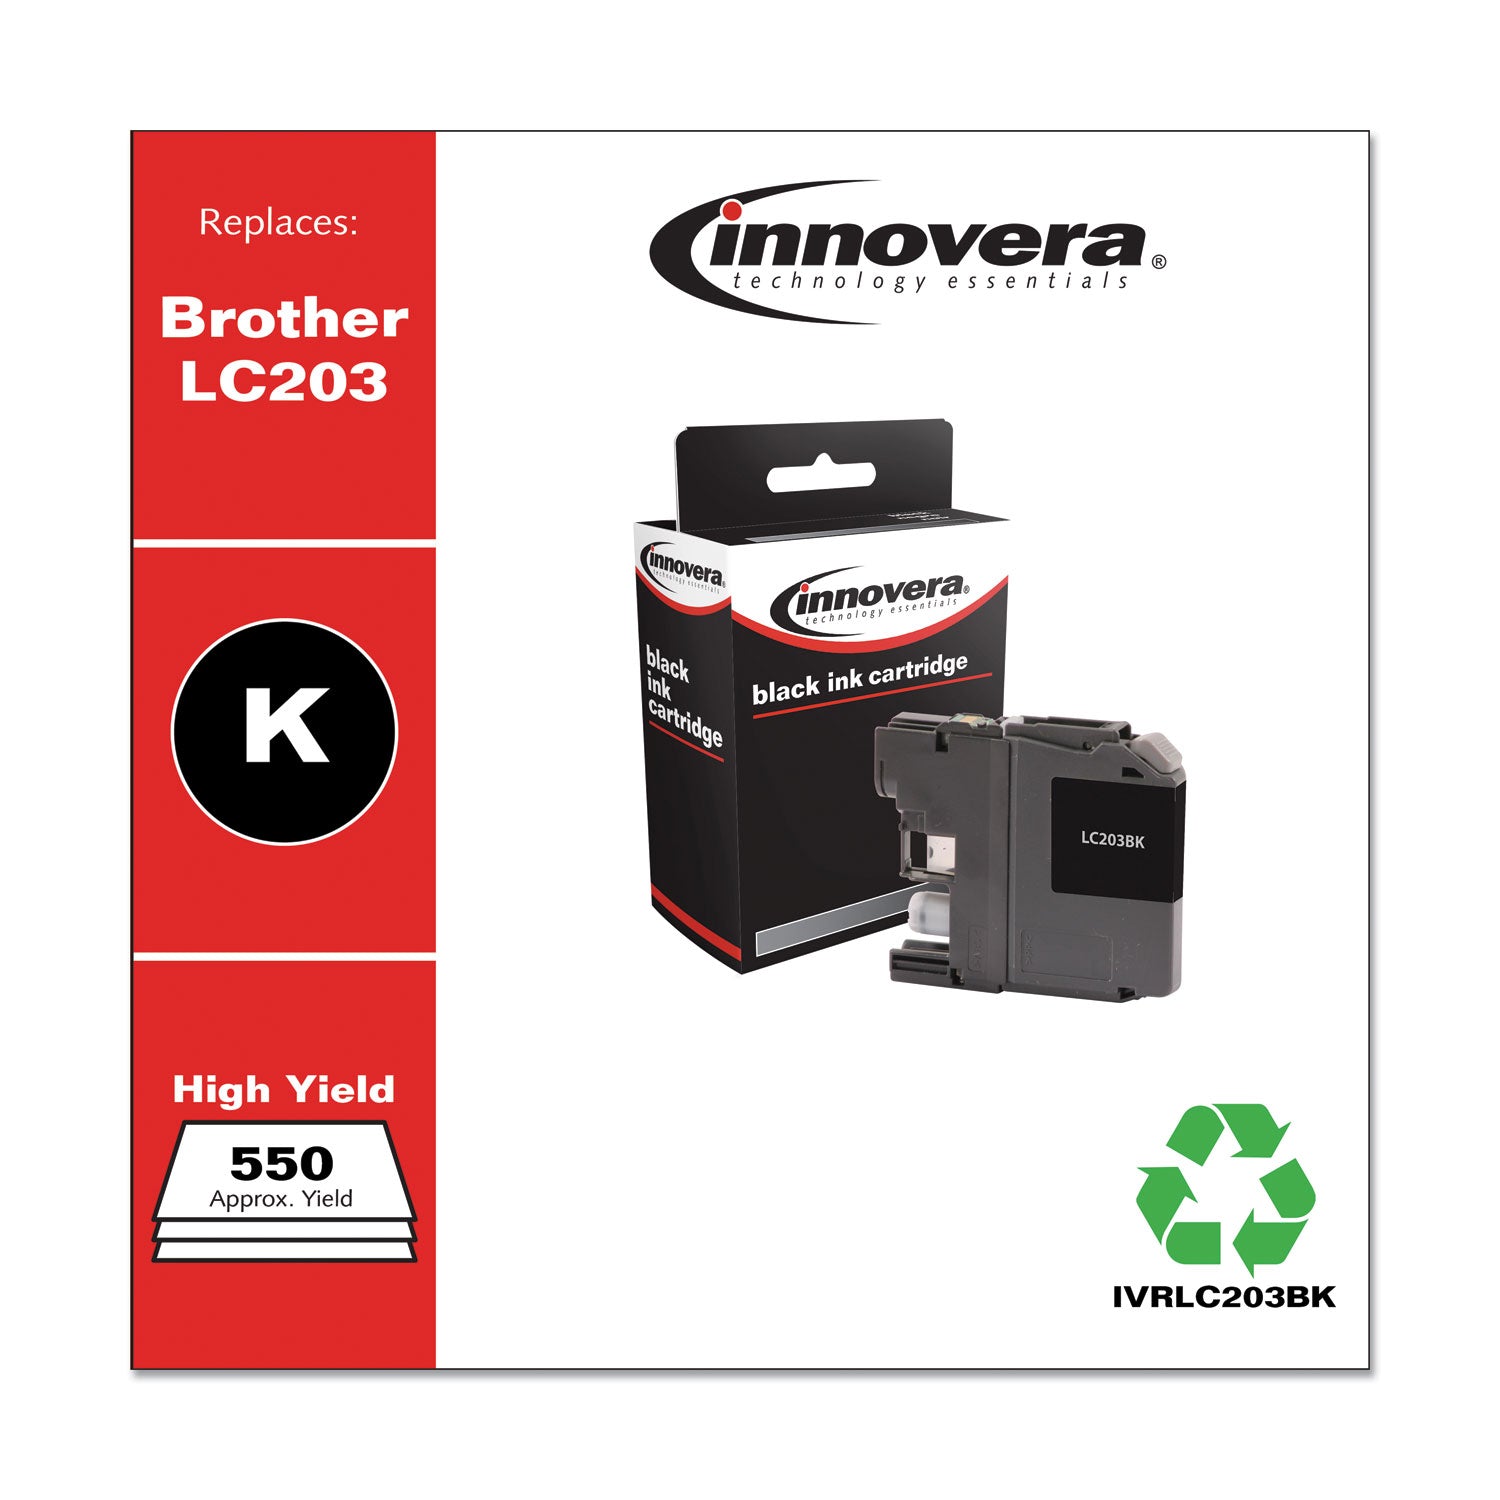 remanufactured-black-high-yield-ink-replacement-for-lc203bk-550-page-yield_ivrlc203bk - 2